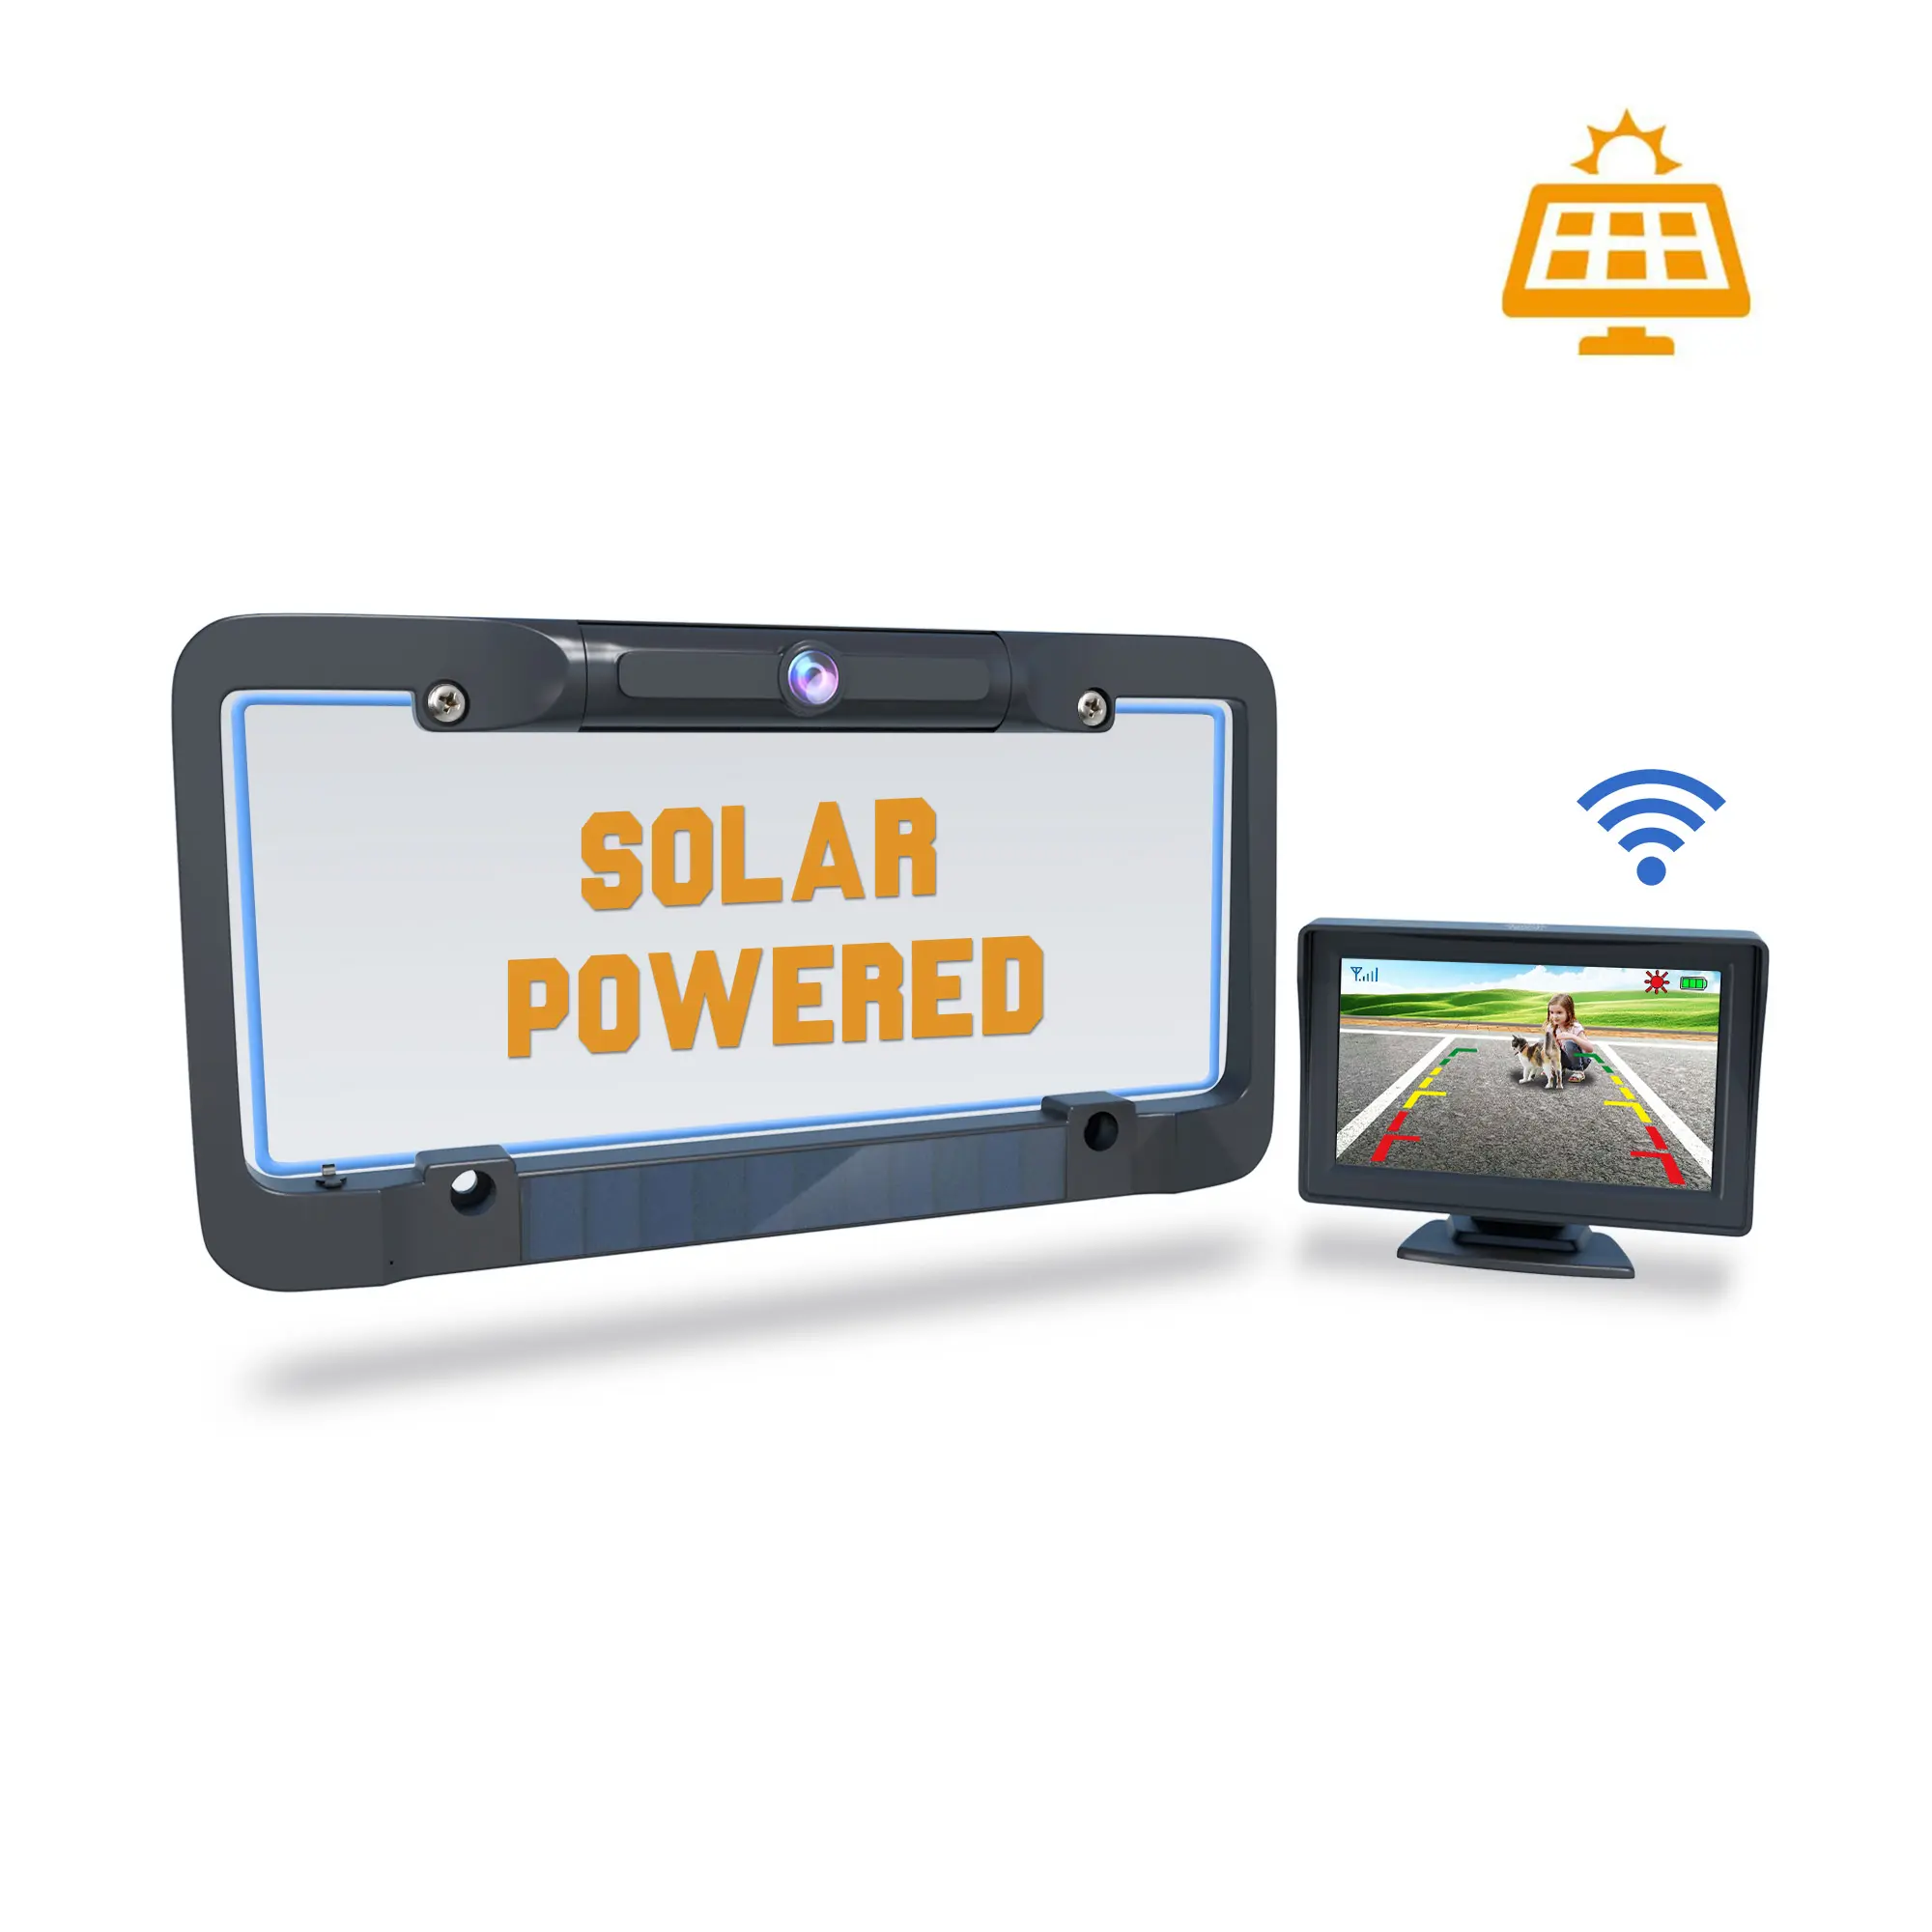 Totally Wireless Digital Solar power Rear view System built-in rechargeable battery operated camera backup